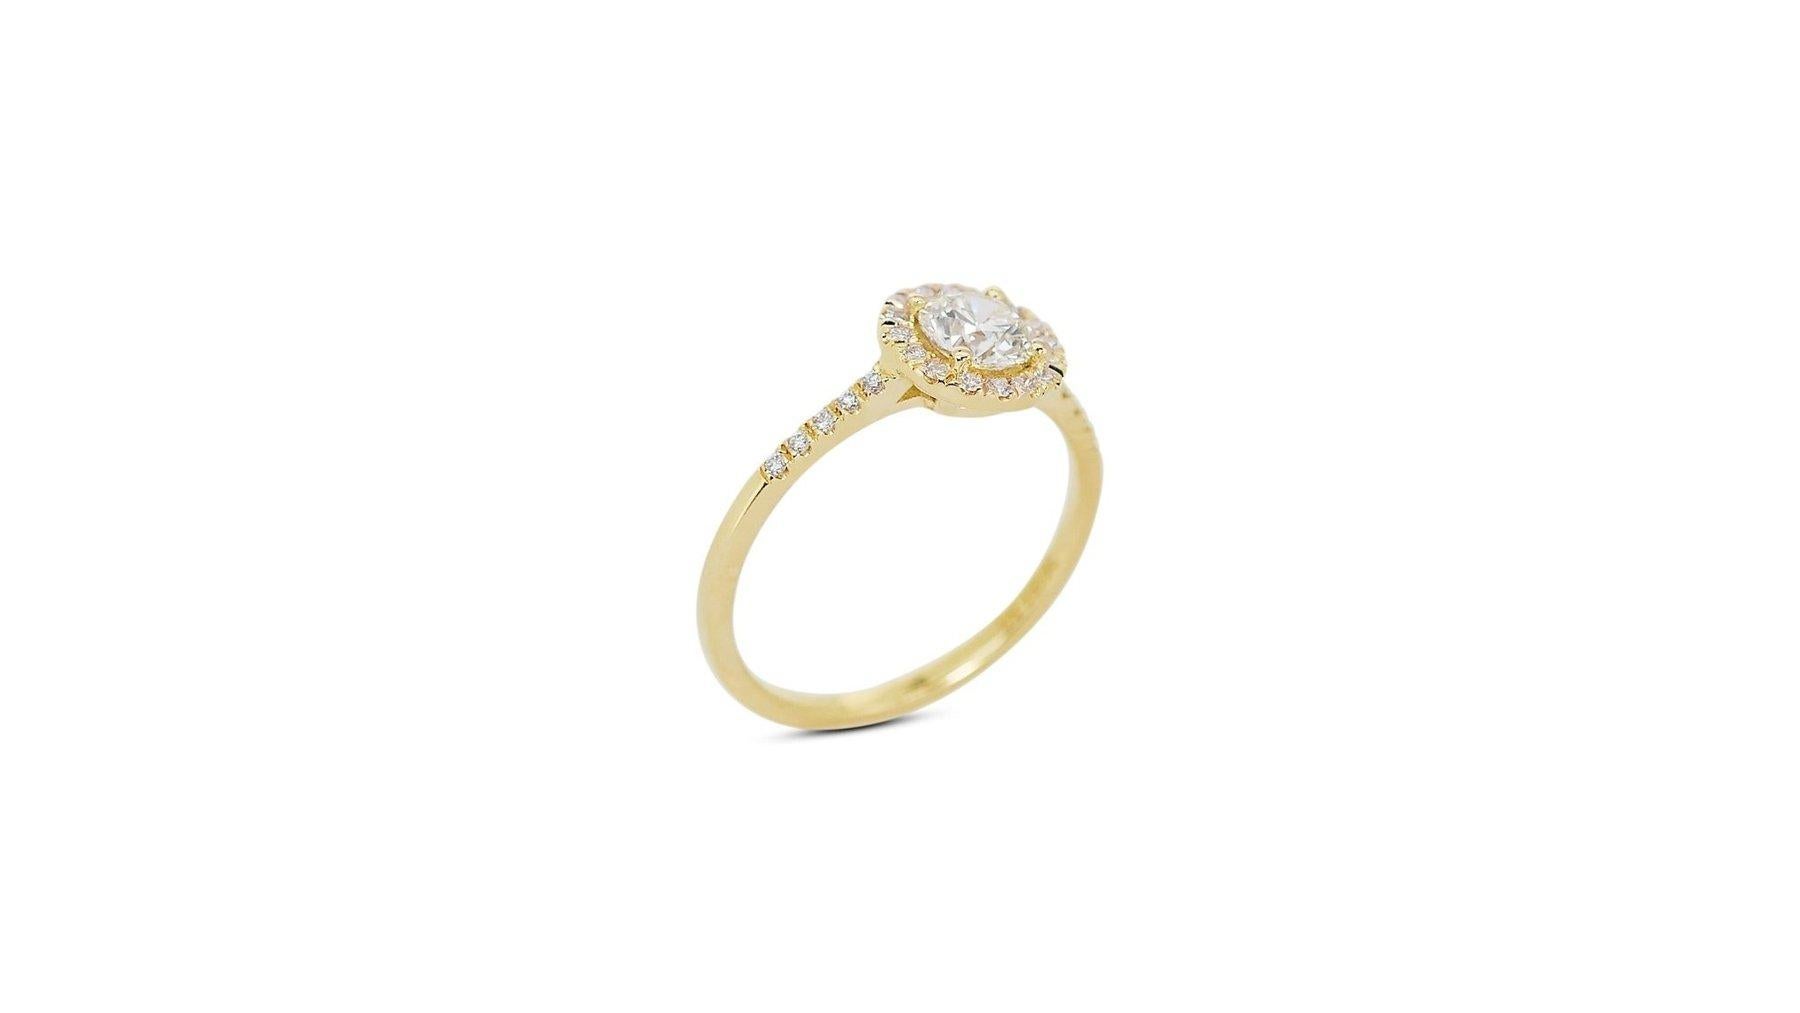 Round Cut Dazzling 1.36ct Diamonds Halo Ring in 18k Yellow Gold - GIA Certified For Sale